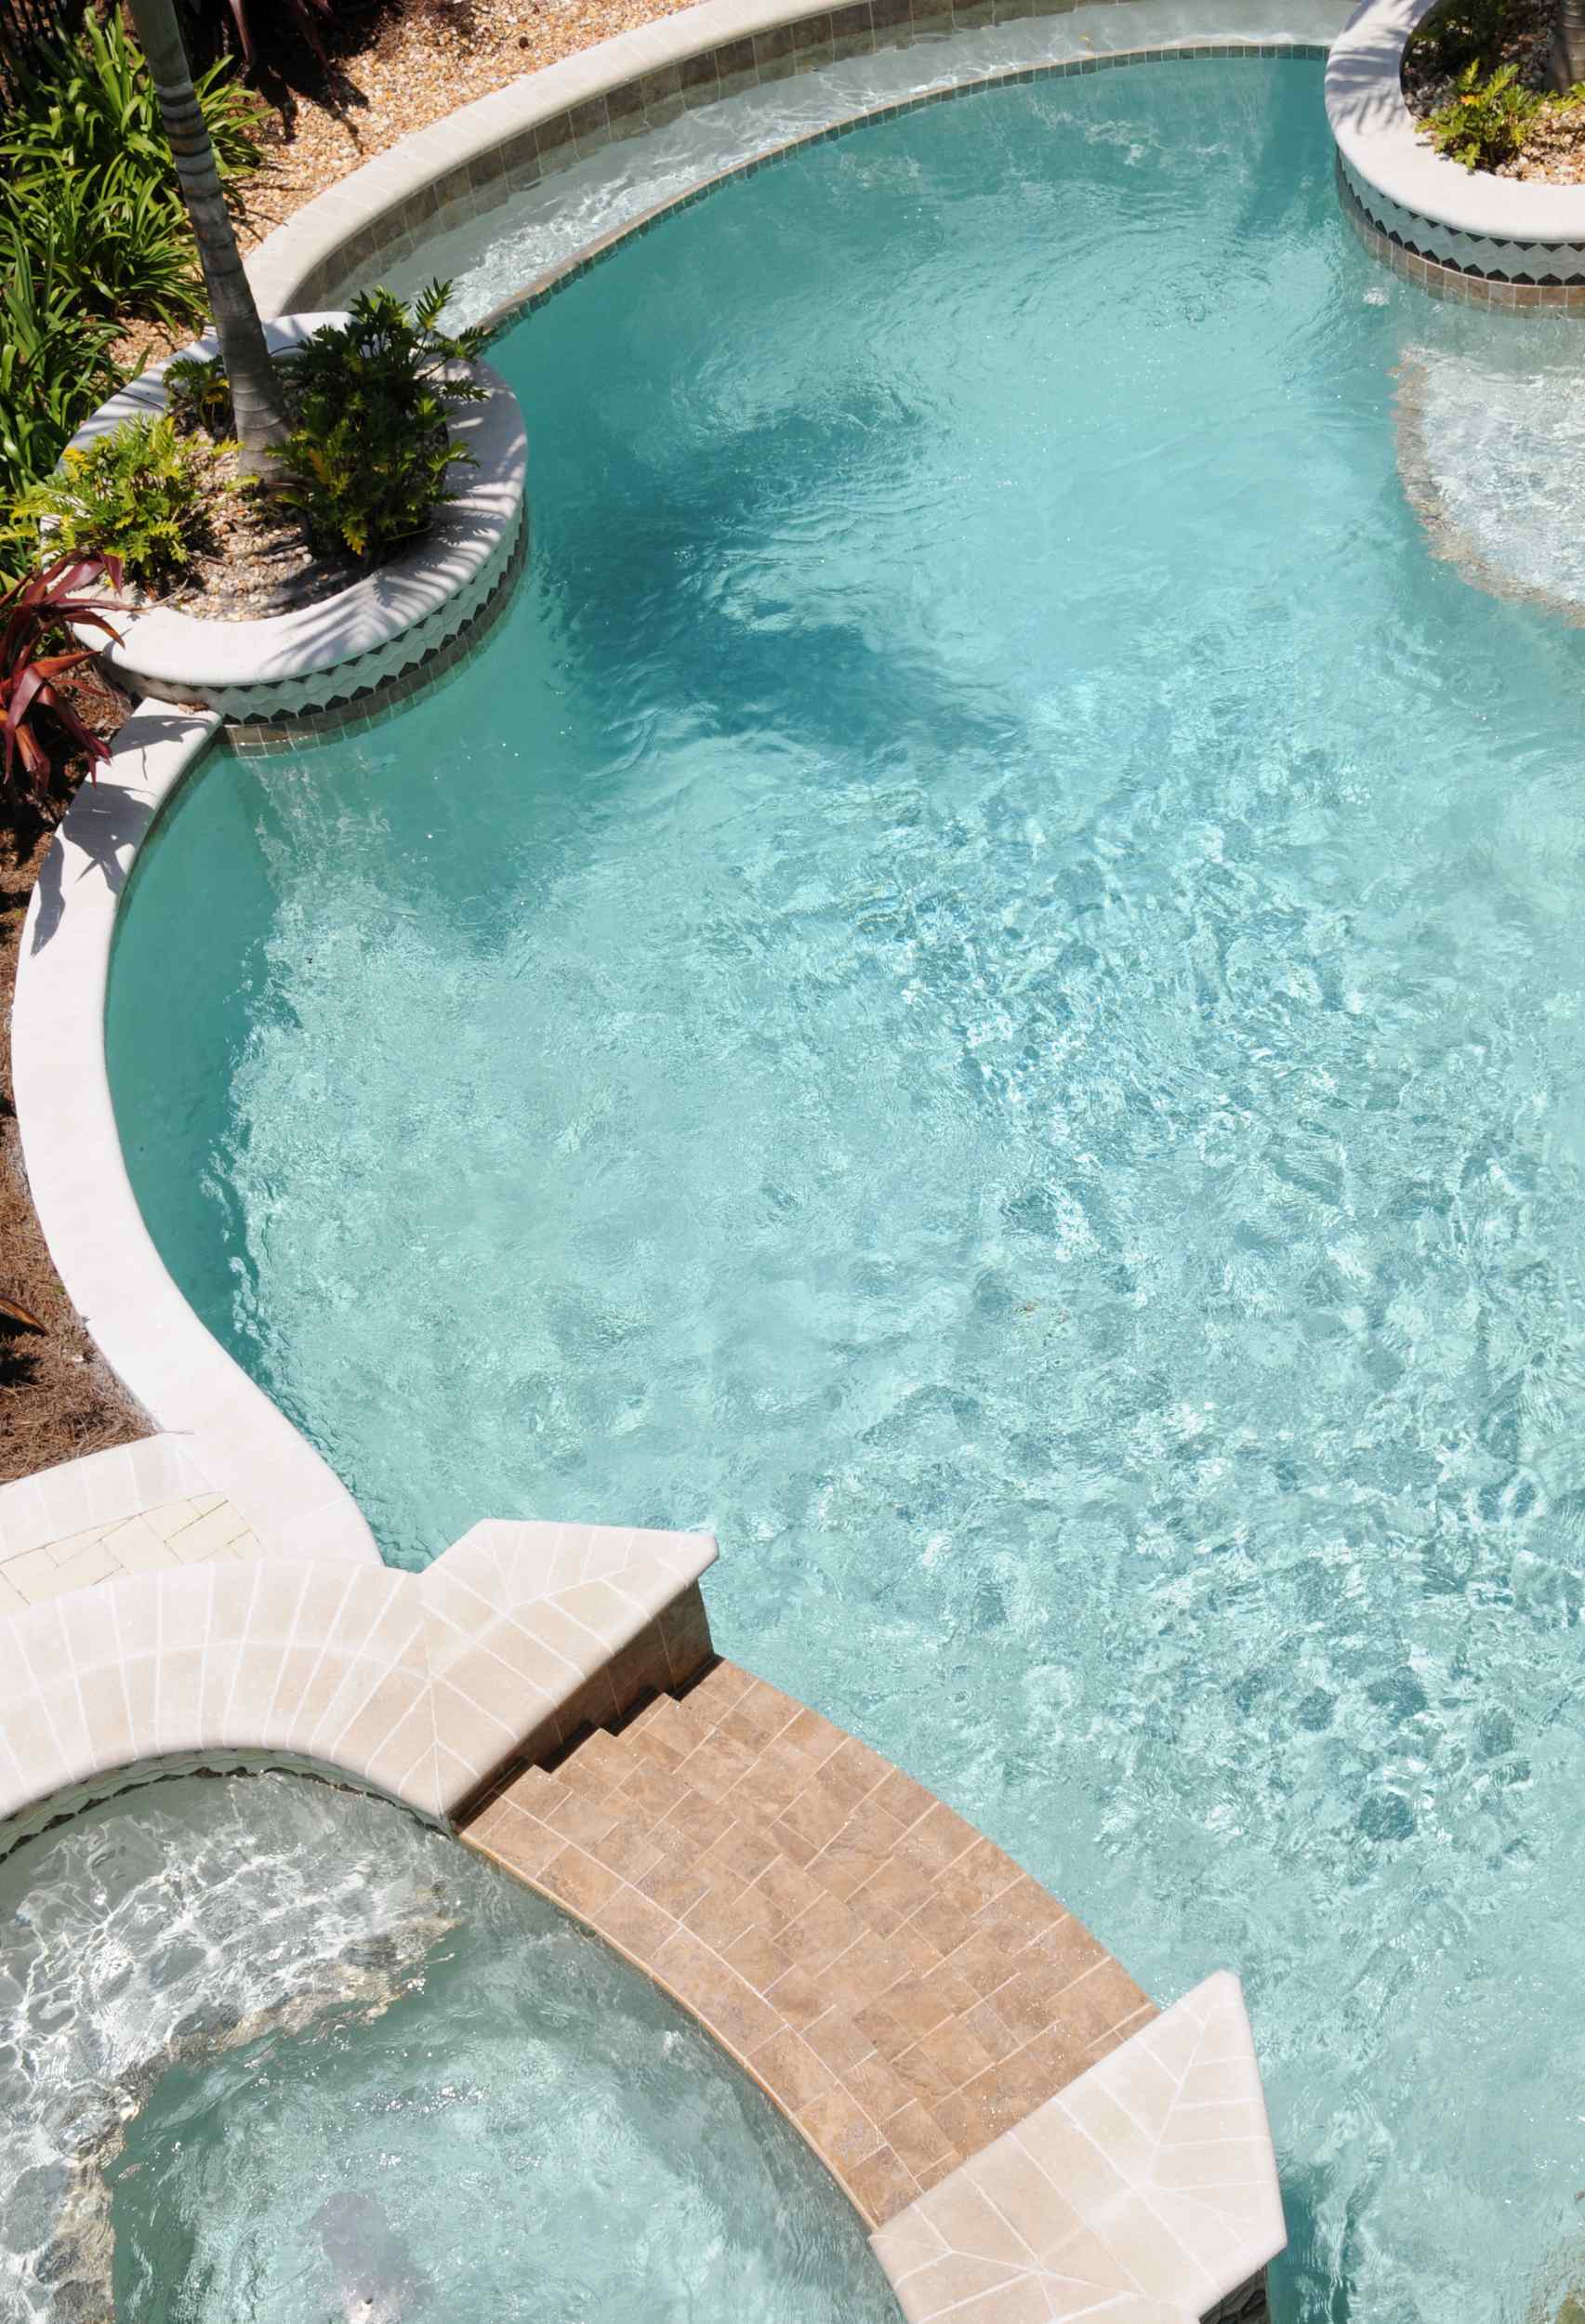 How To Determine the Source of a Pool Leak in 5 Simple Steps